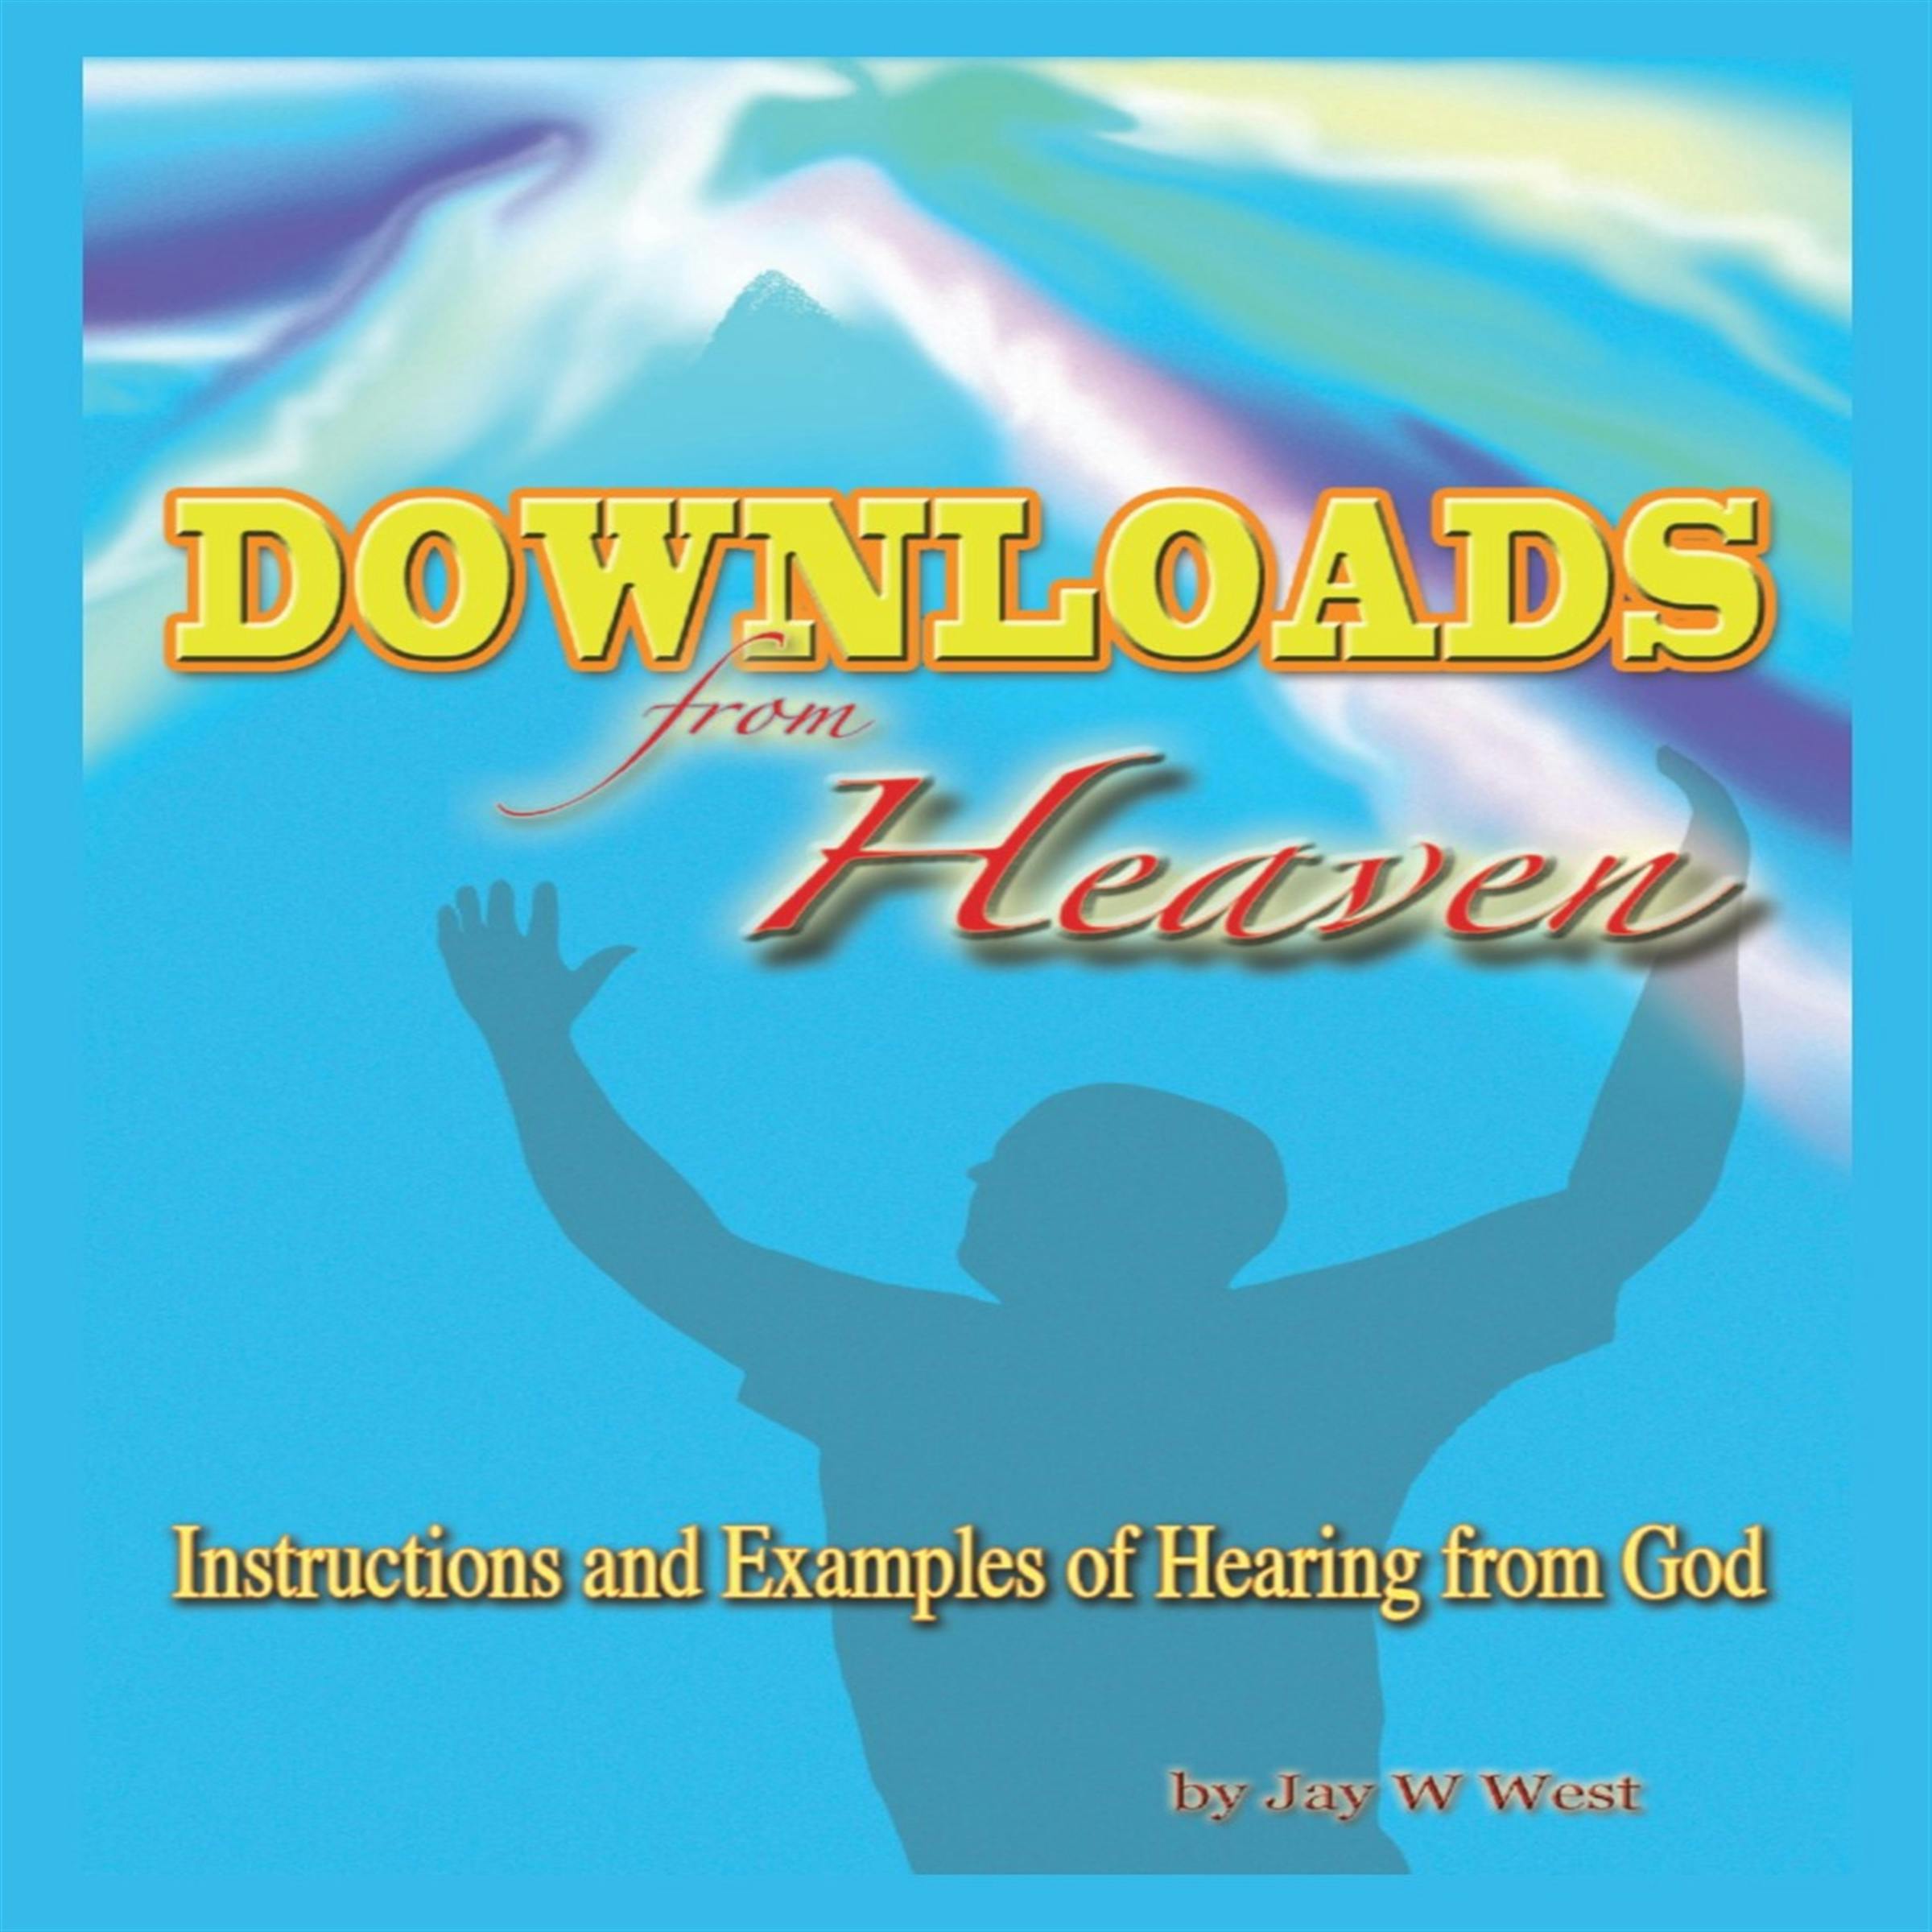 Downloads From Heaven: Instructions and Examples of Hearing from God - undefined